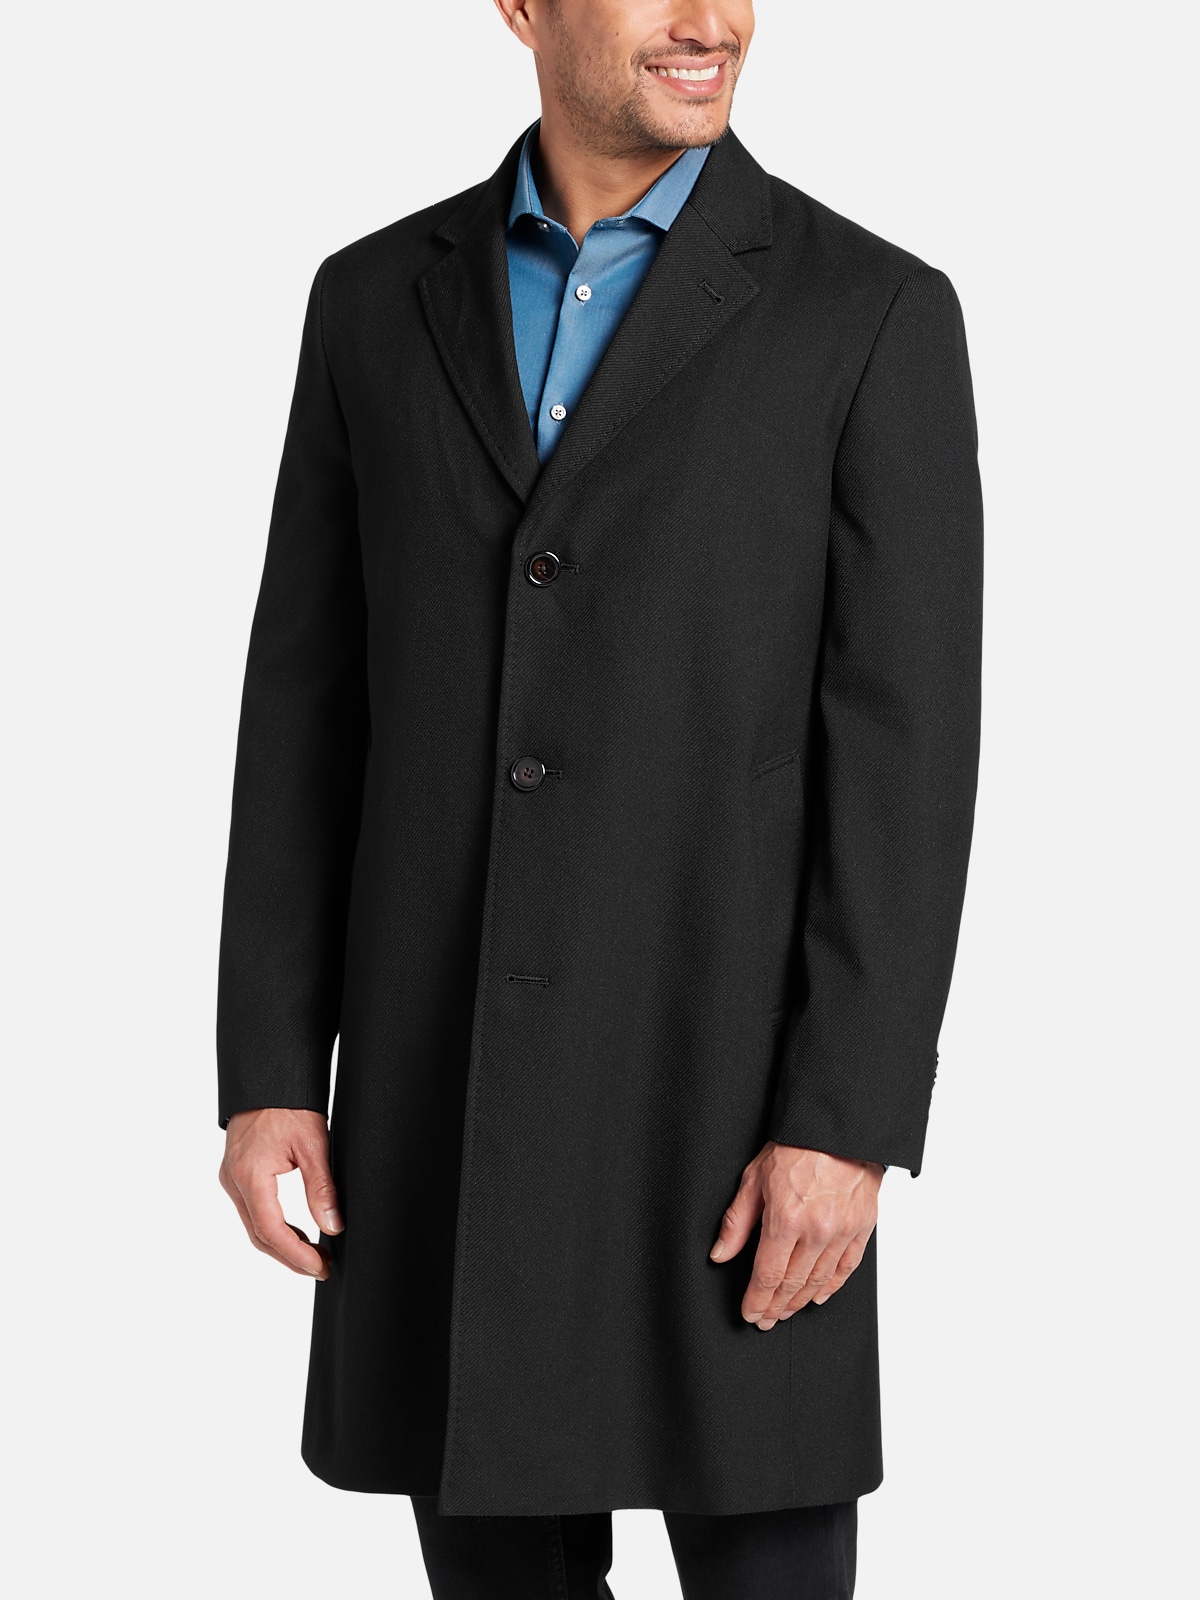 Michael Kors Classic Fit Topcoat | Clearance Outerwear| Men's Wearhouse